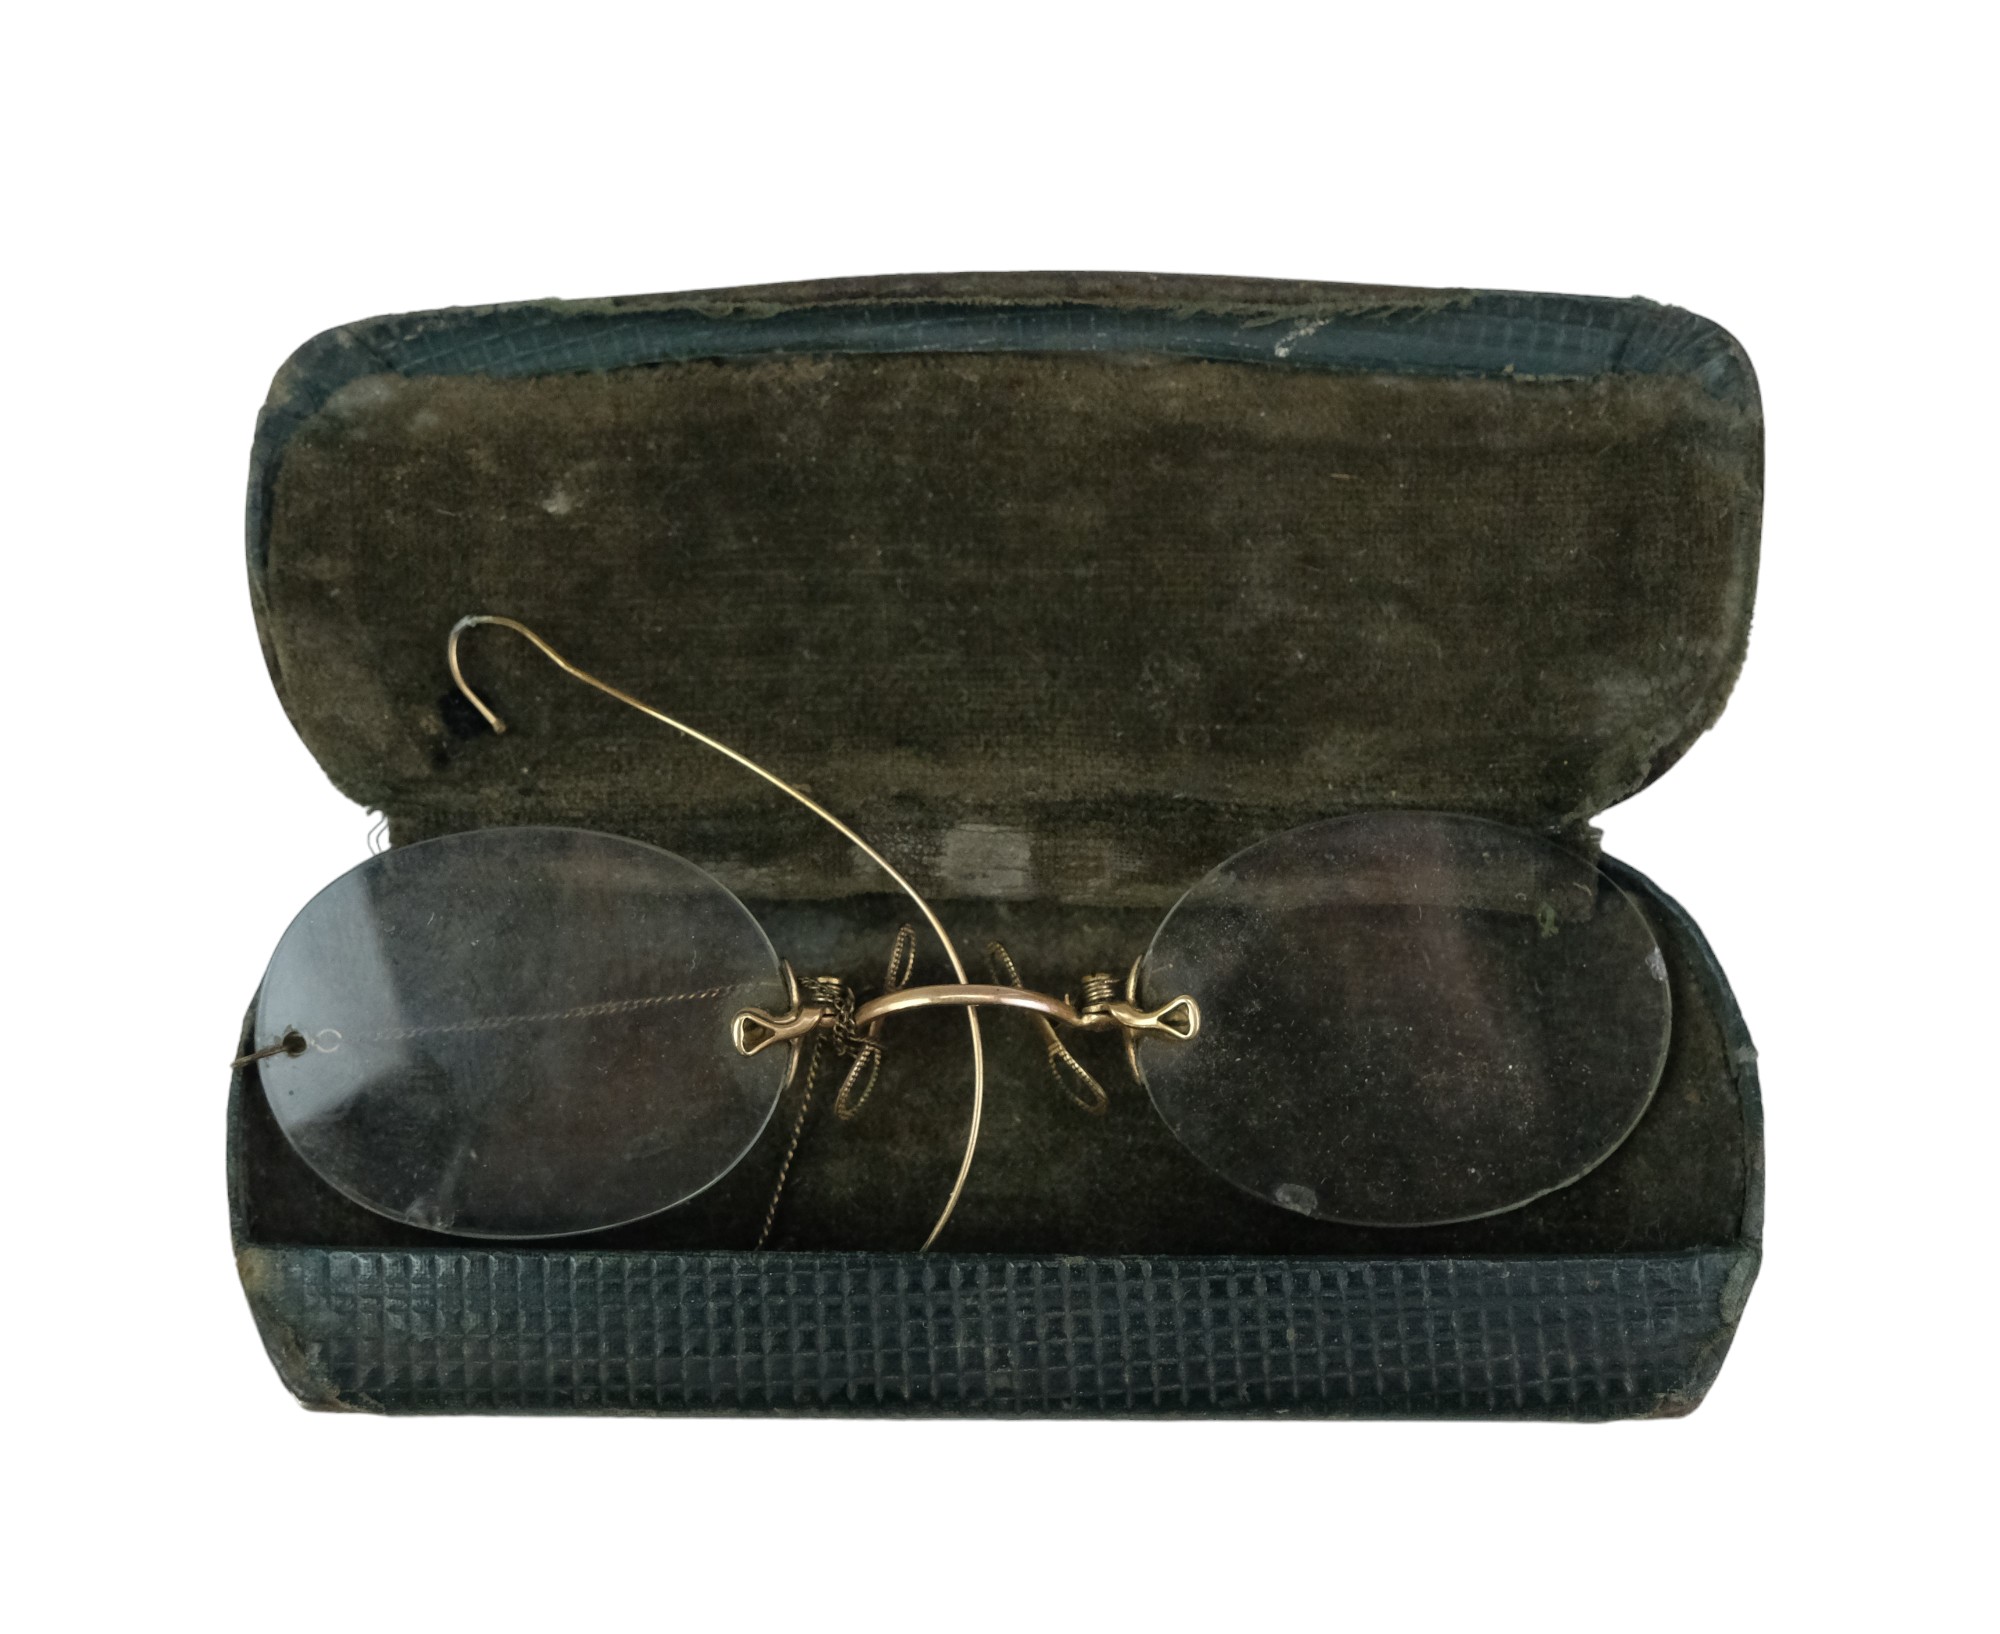 A set of late 19th / early 20th Century pince nez spectacles